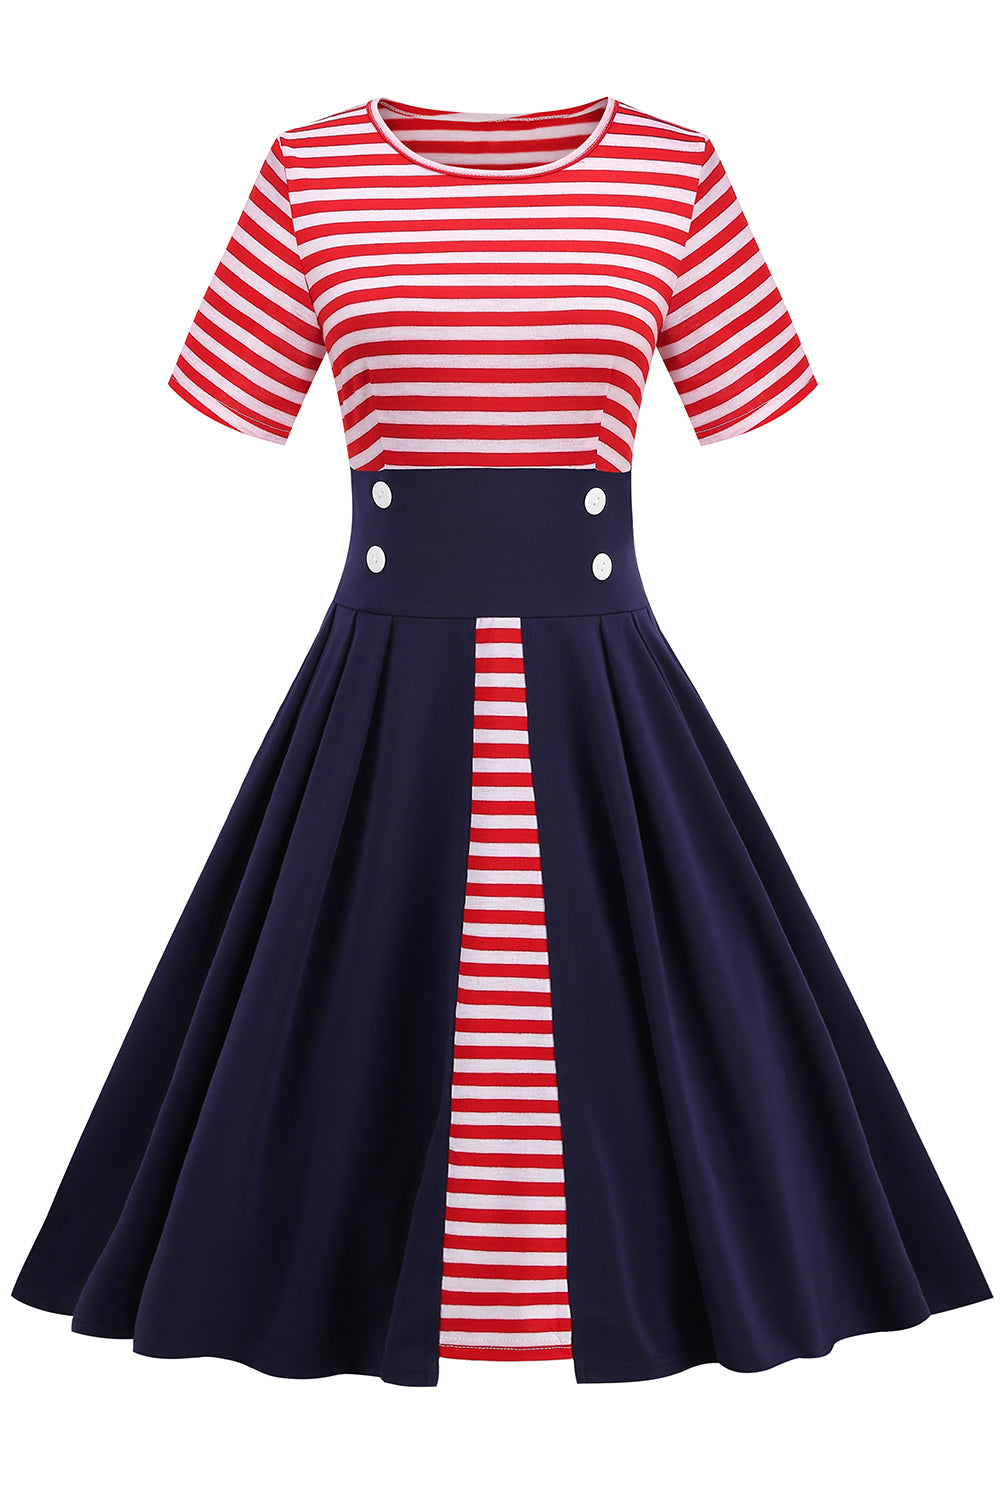 Navy and Red Stripes Vintage 1950s Dress